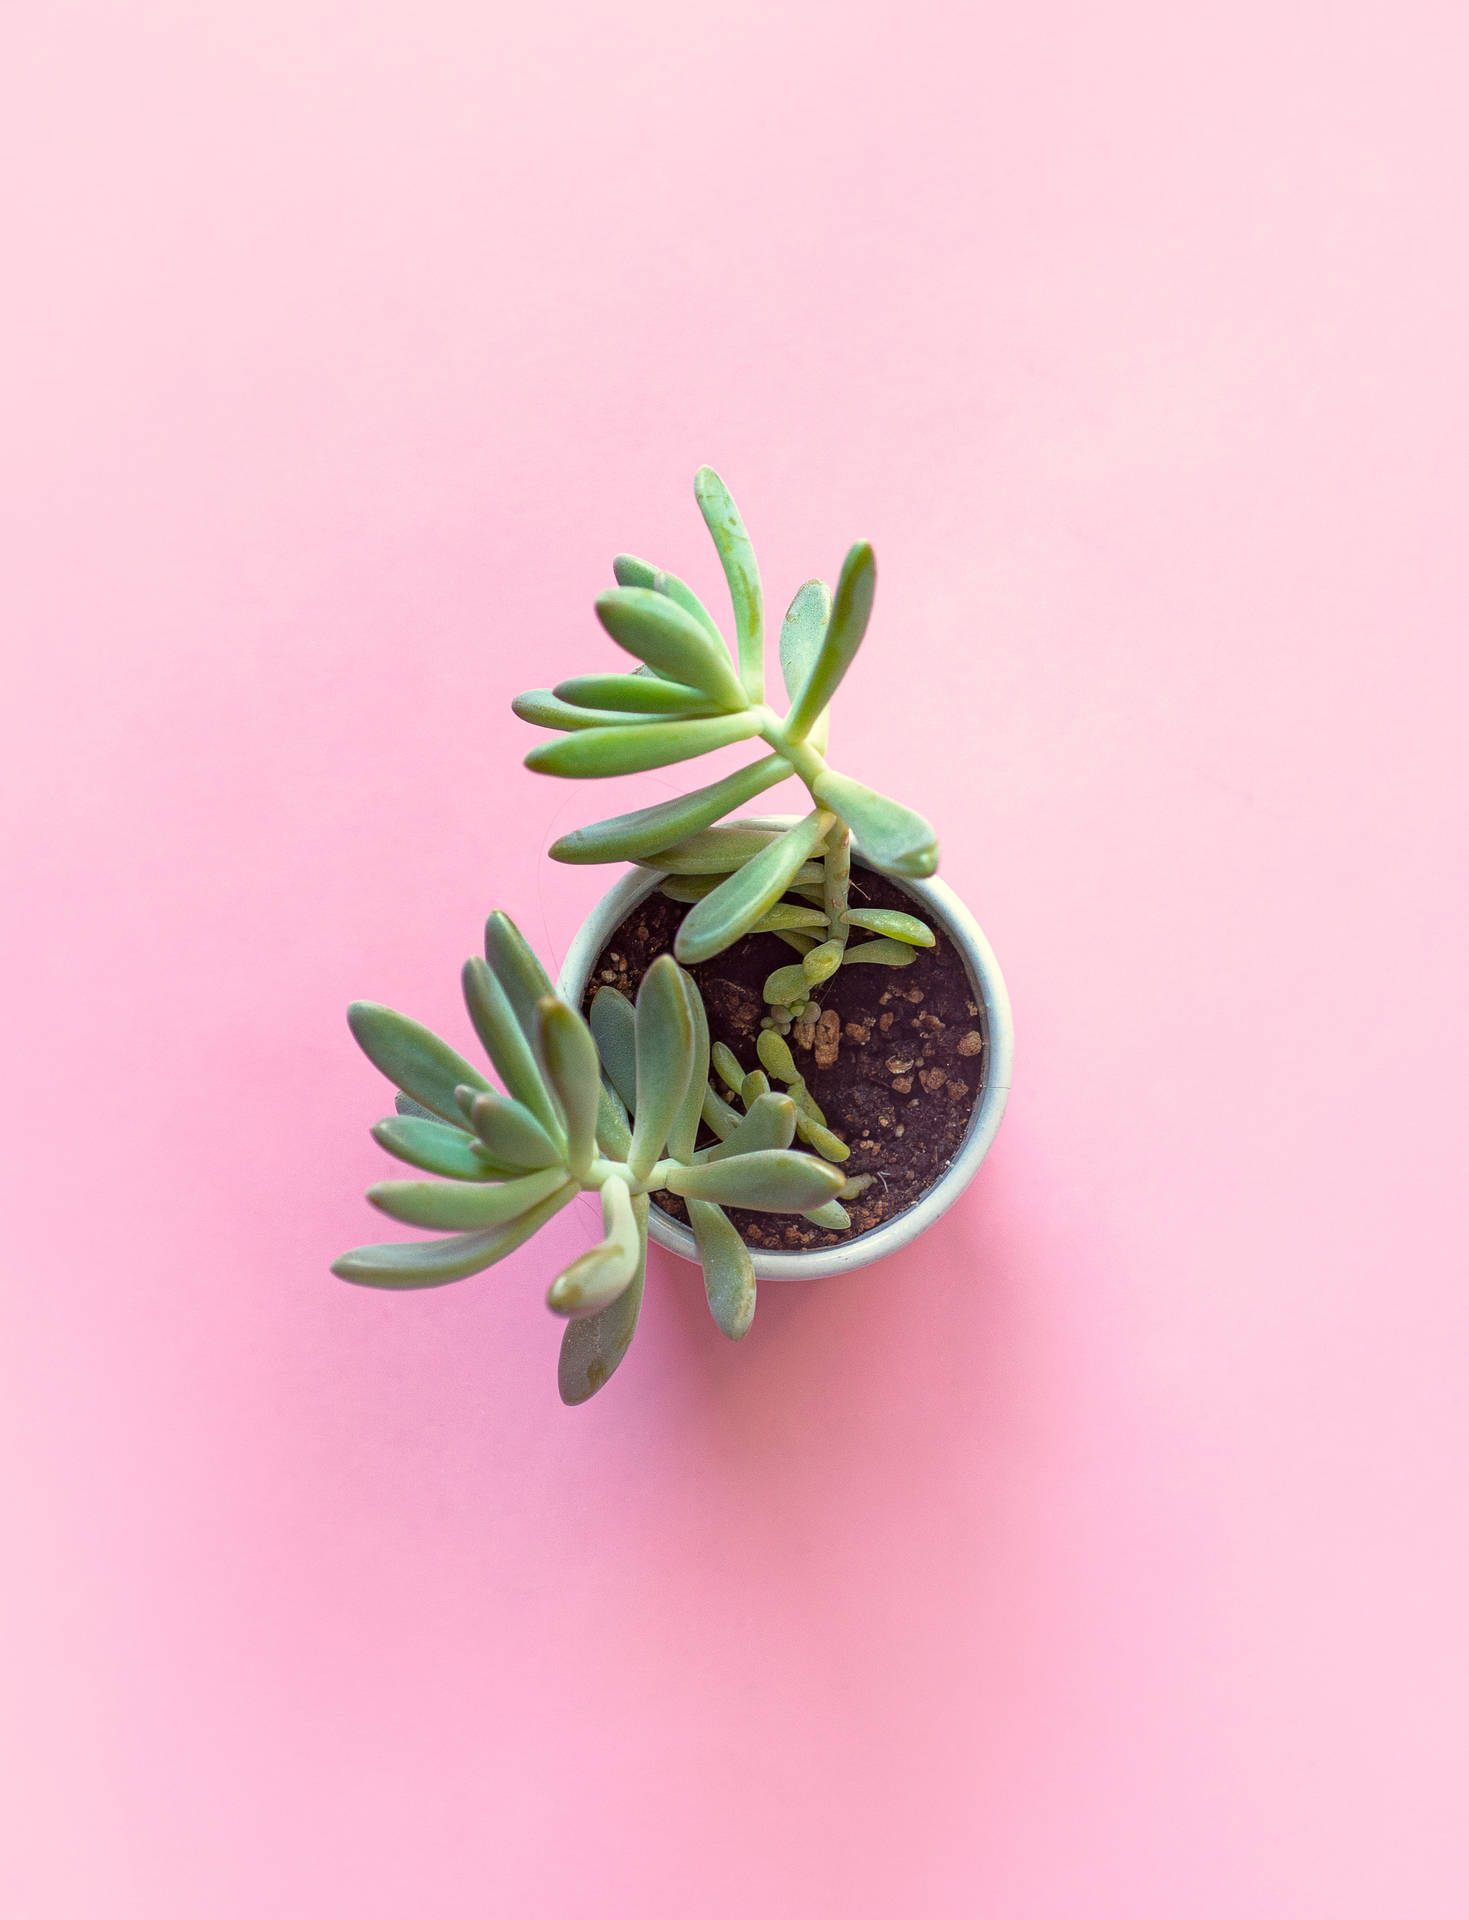 Succulent On Pastel Pink Color Table Background